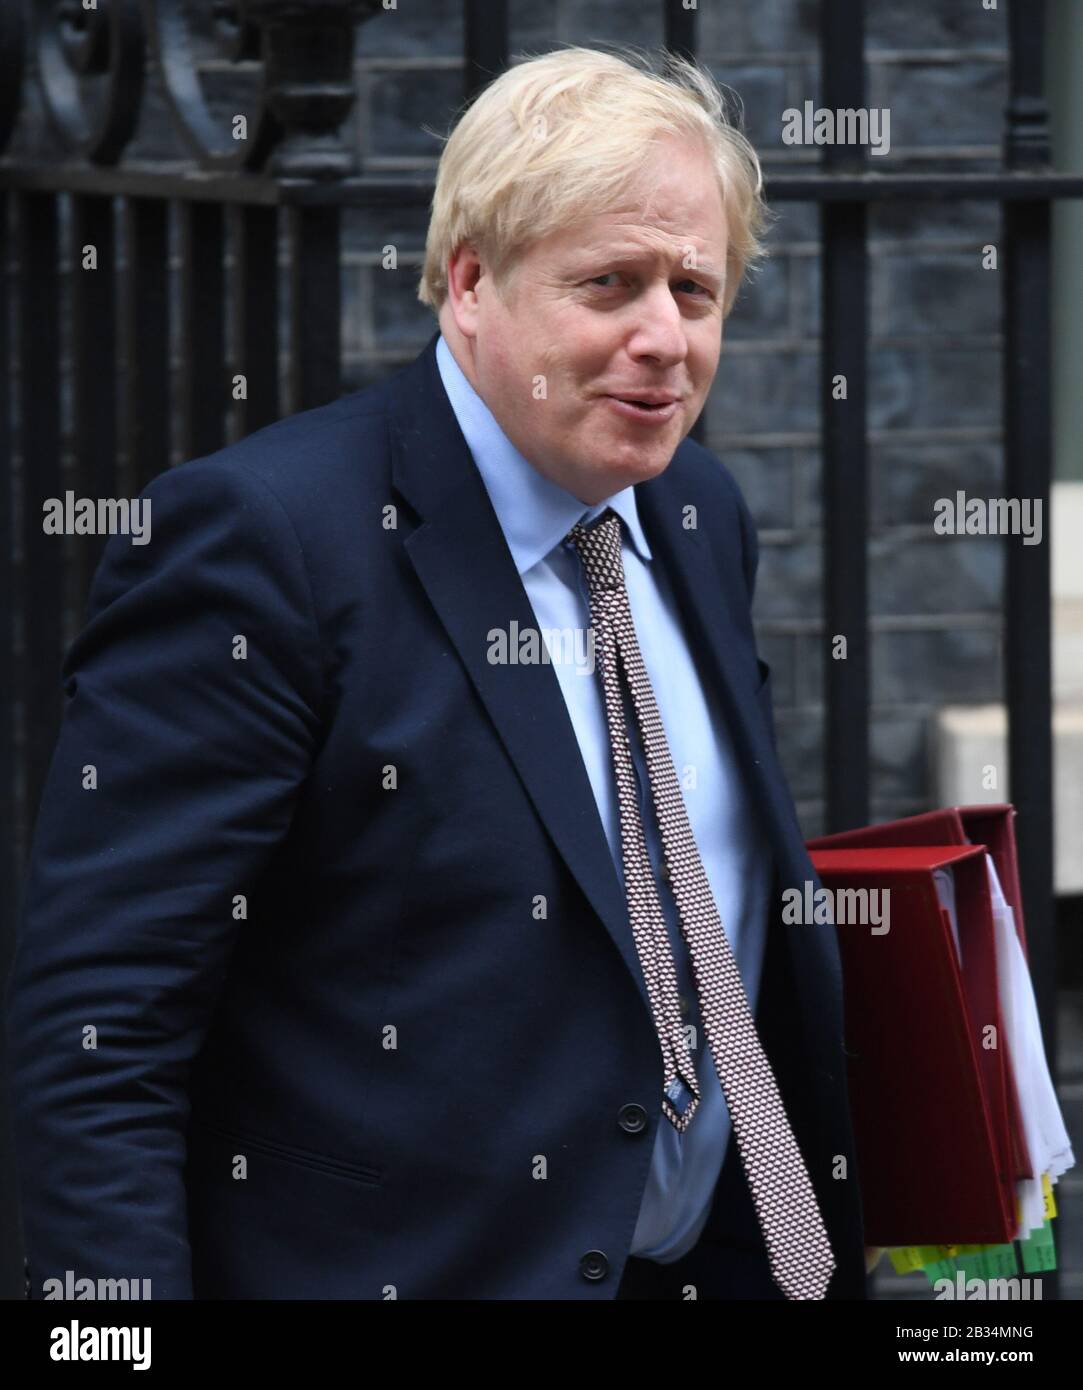 Prime Minister Boris Johnson leaves 10 Downing Street, London, for the House of Commons for Prime Minister's Questions. Stock Photo